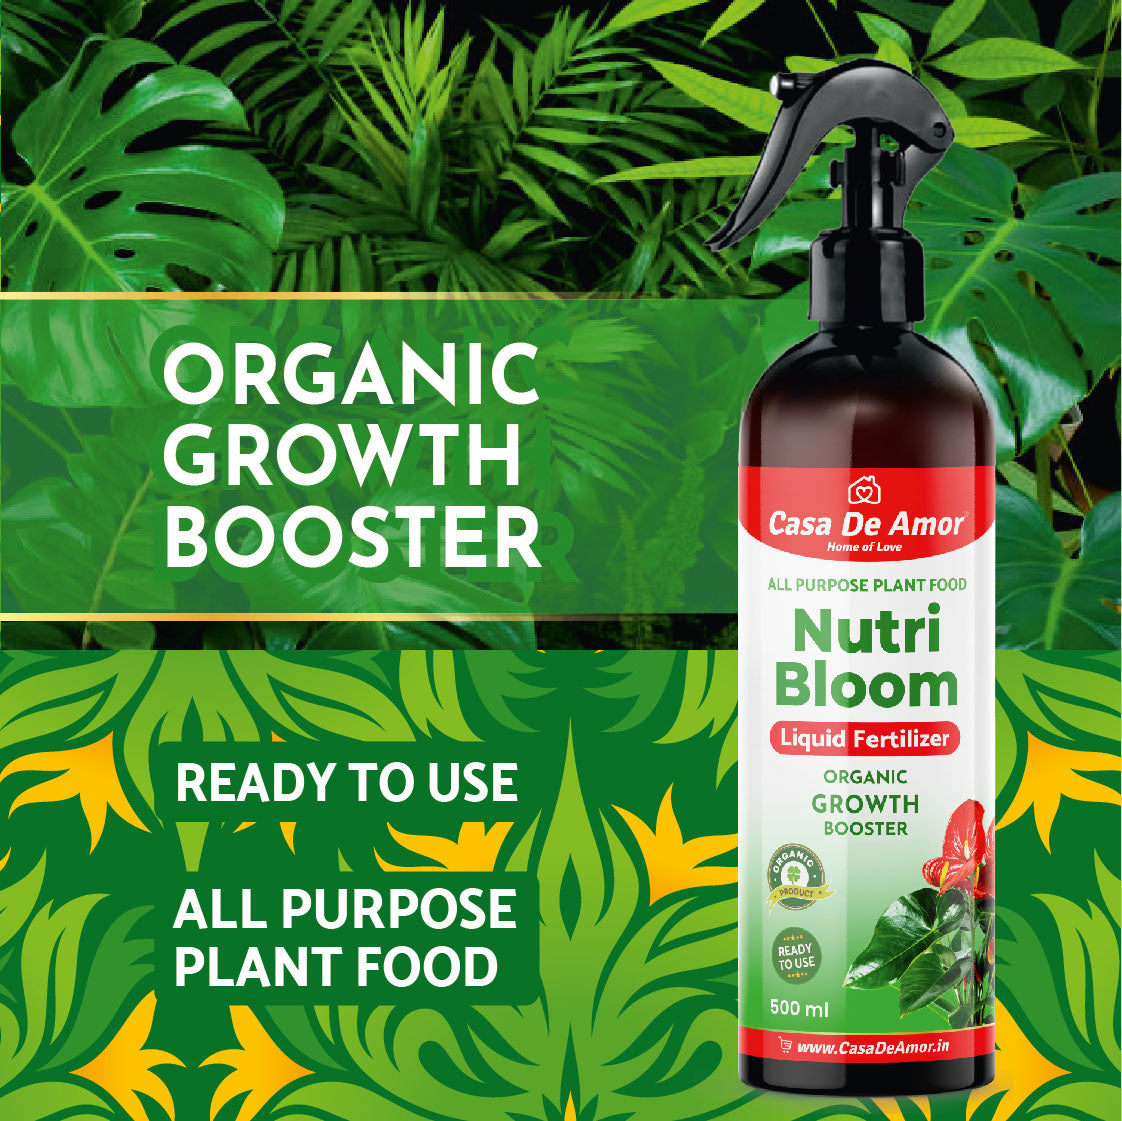 Casa De Amor Nutri Bloom – Plant Growth Booster for Potted Indoor and Outdoor Plants, Balanced Macro & Micro Nutrients, Ready to Use Spray- 500ml